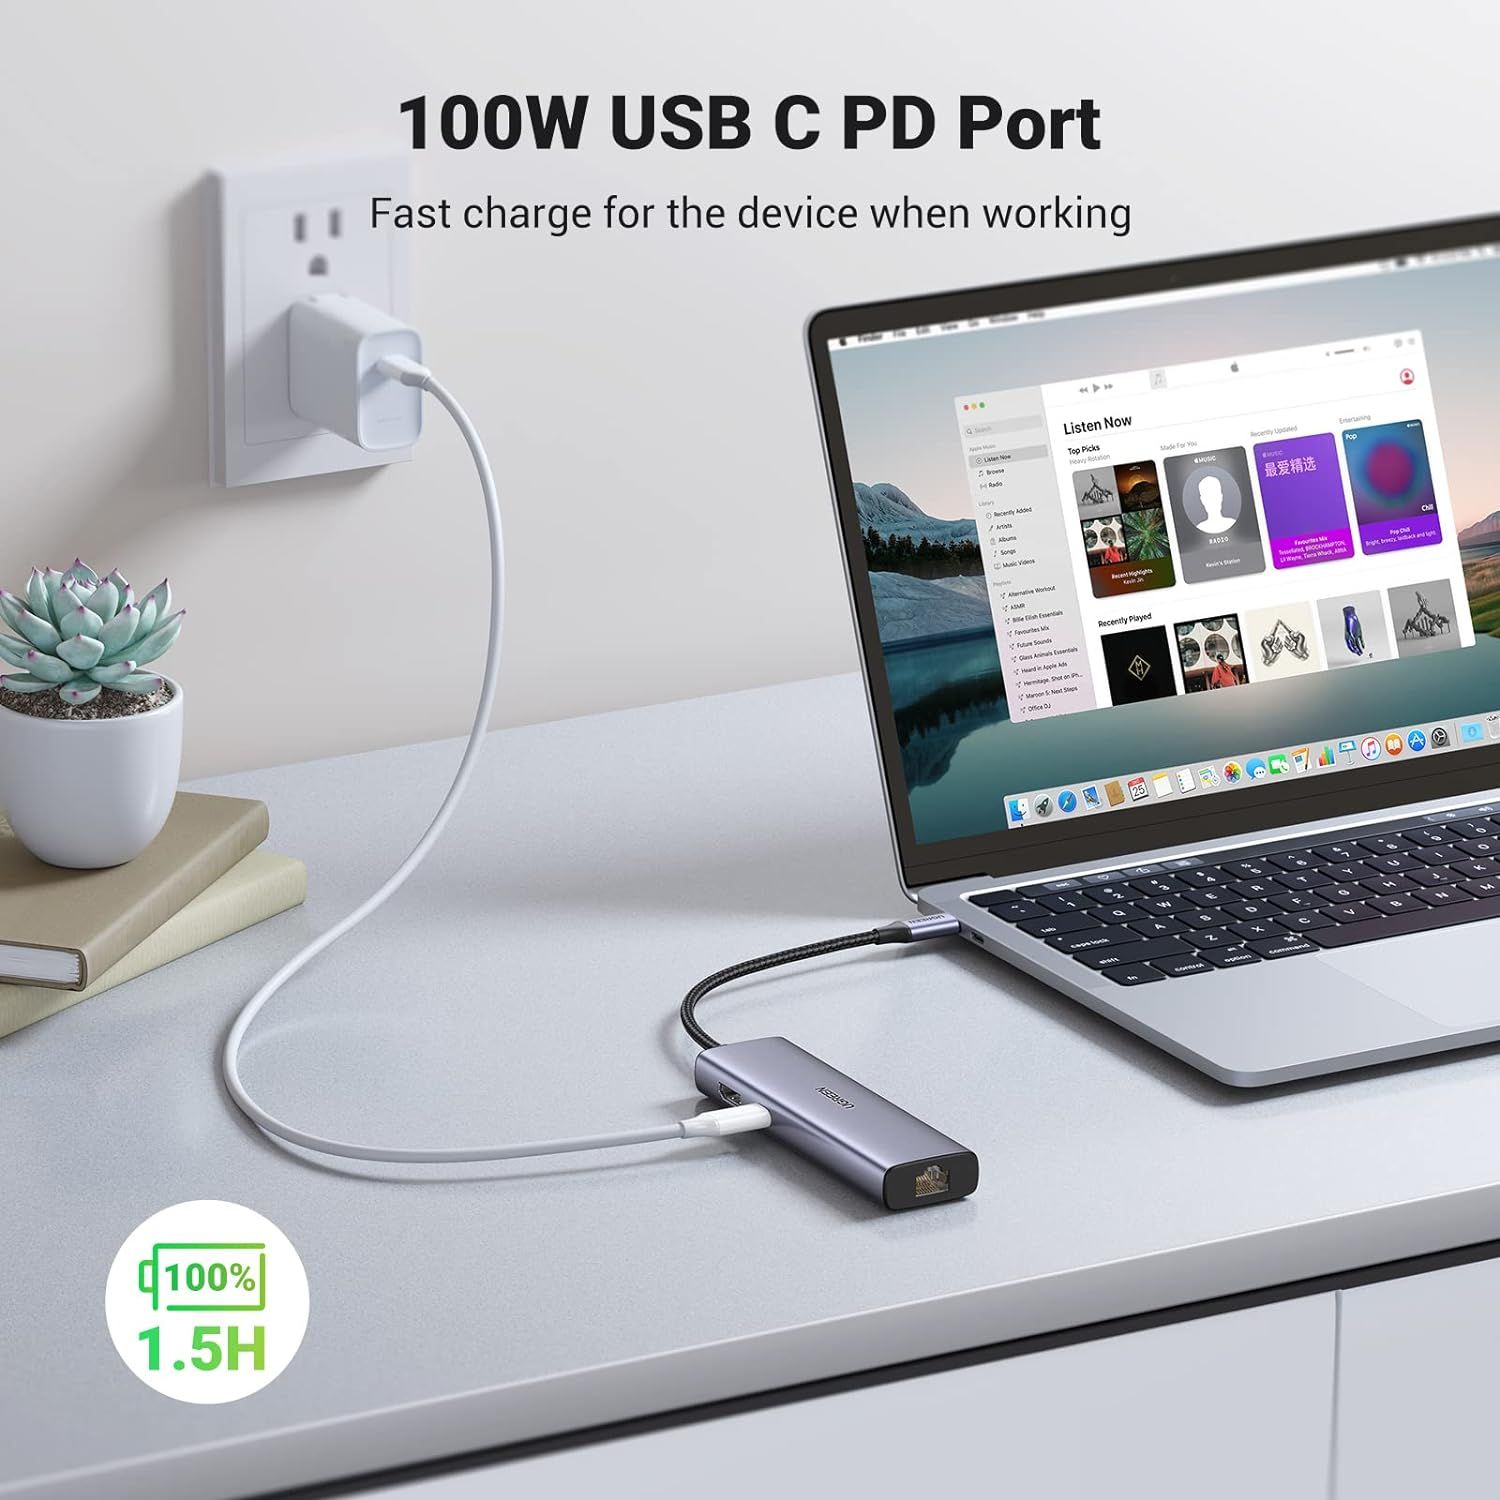 Anker USB C to HDMI Adapter (4K@60Hz), 2 PowerExpand+ Aluminum Portable USB  C Adapter, for MacBook Pro, MacBook Air, iPad Pro, Pixelbook, XPS, Galaxy,  and More (Compatible with Thunderbolt 3 ports) 